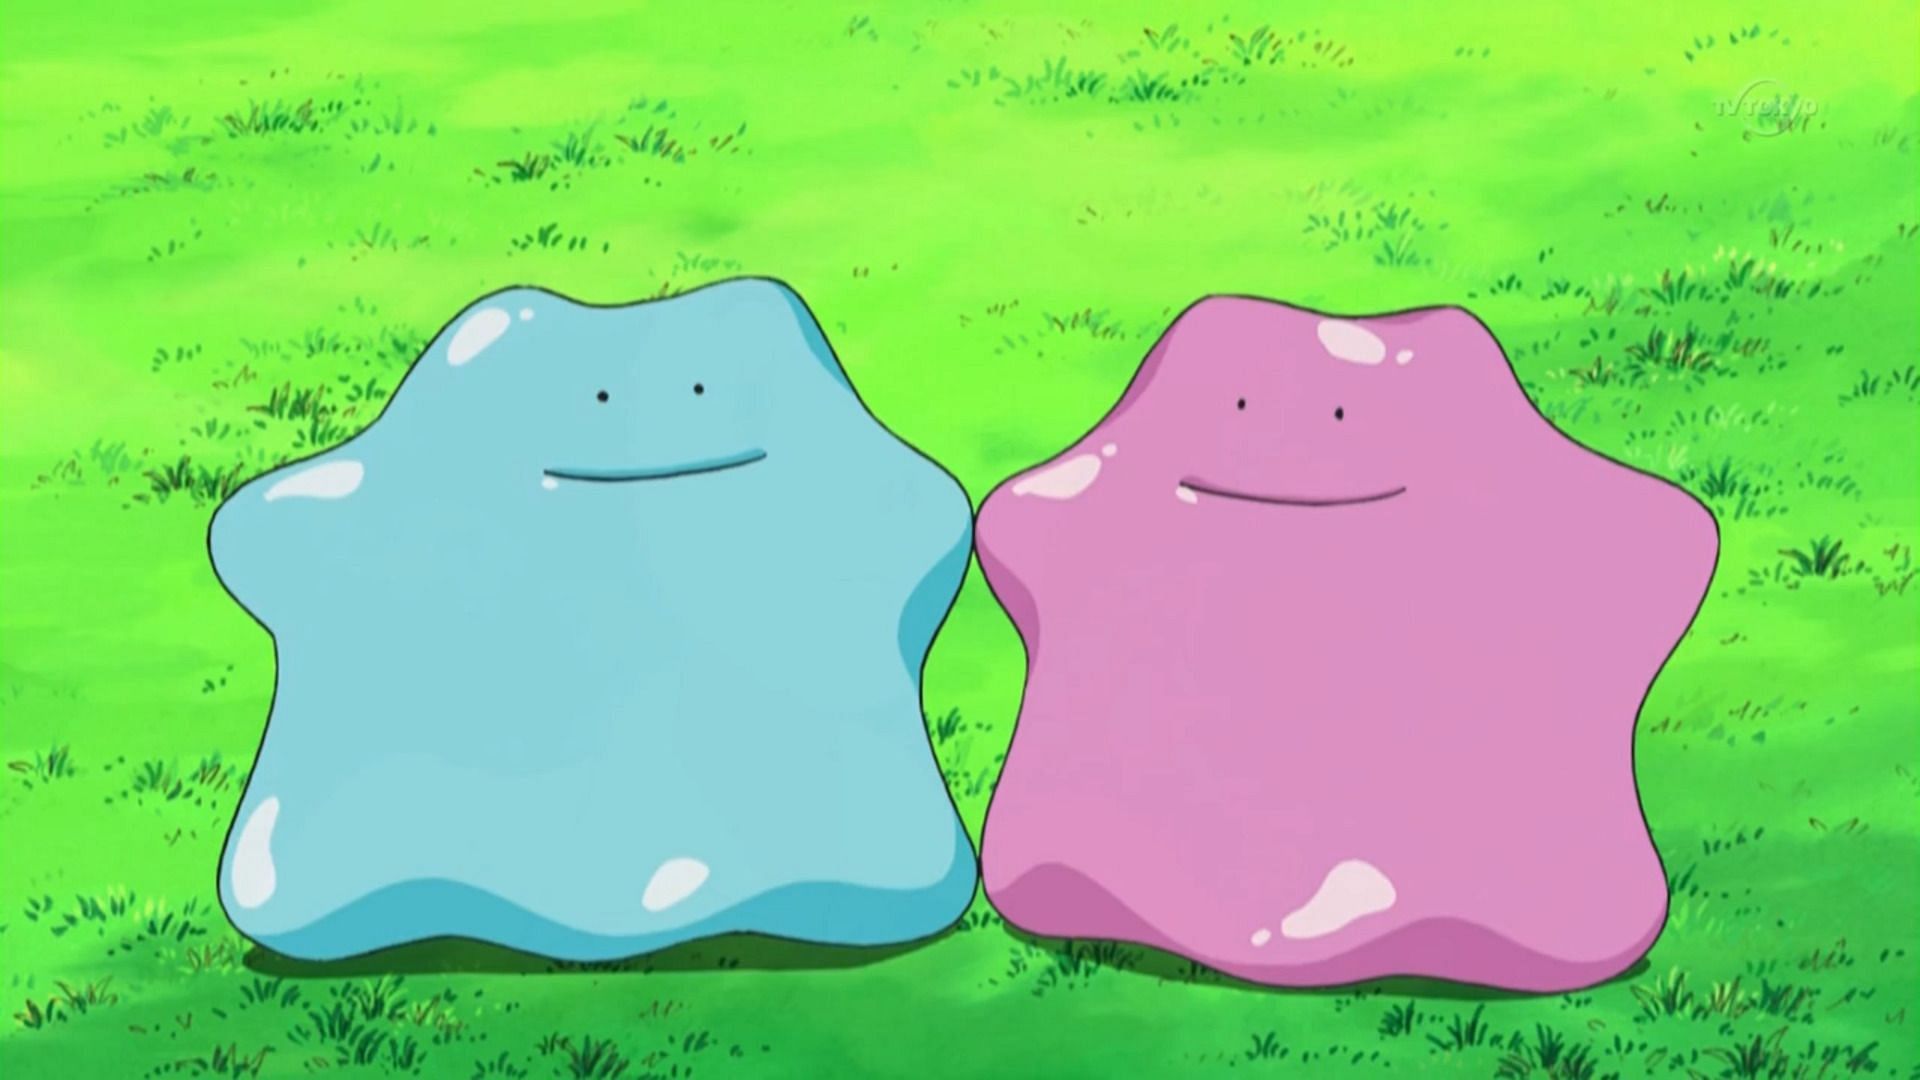 Shiny Ditto (pictured left) as it appears in the anime (Image via The Pokemon Company)